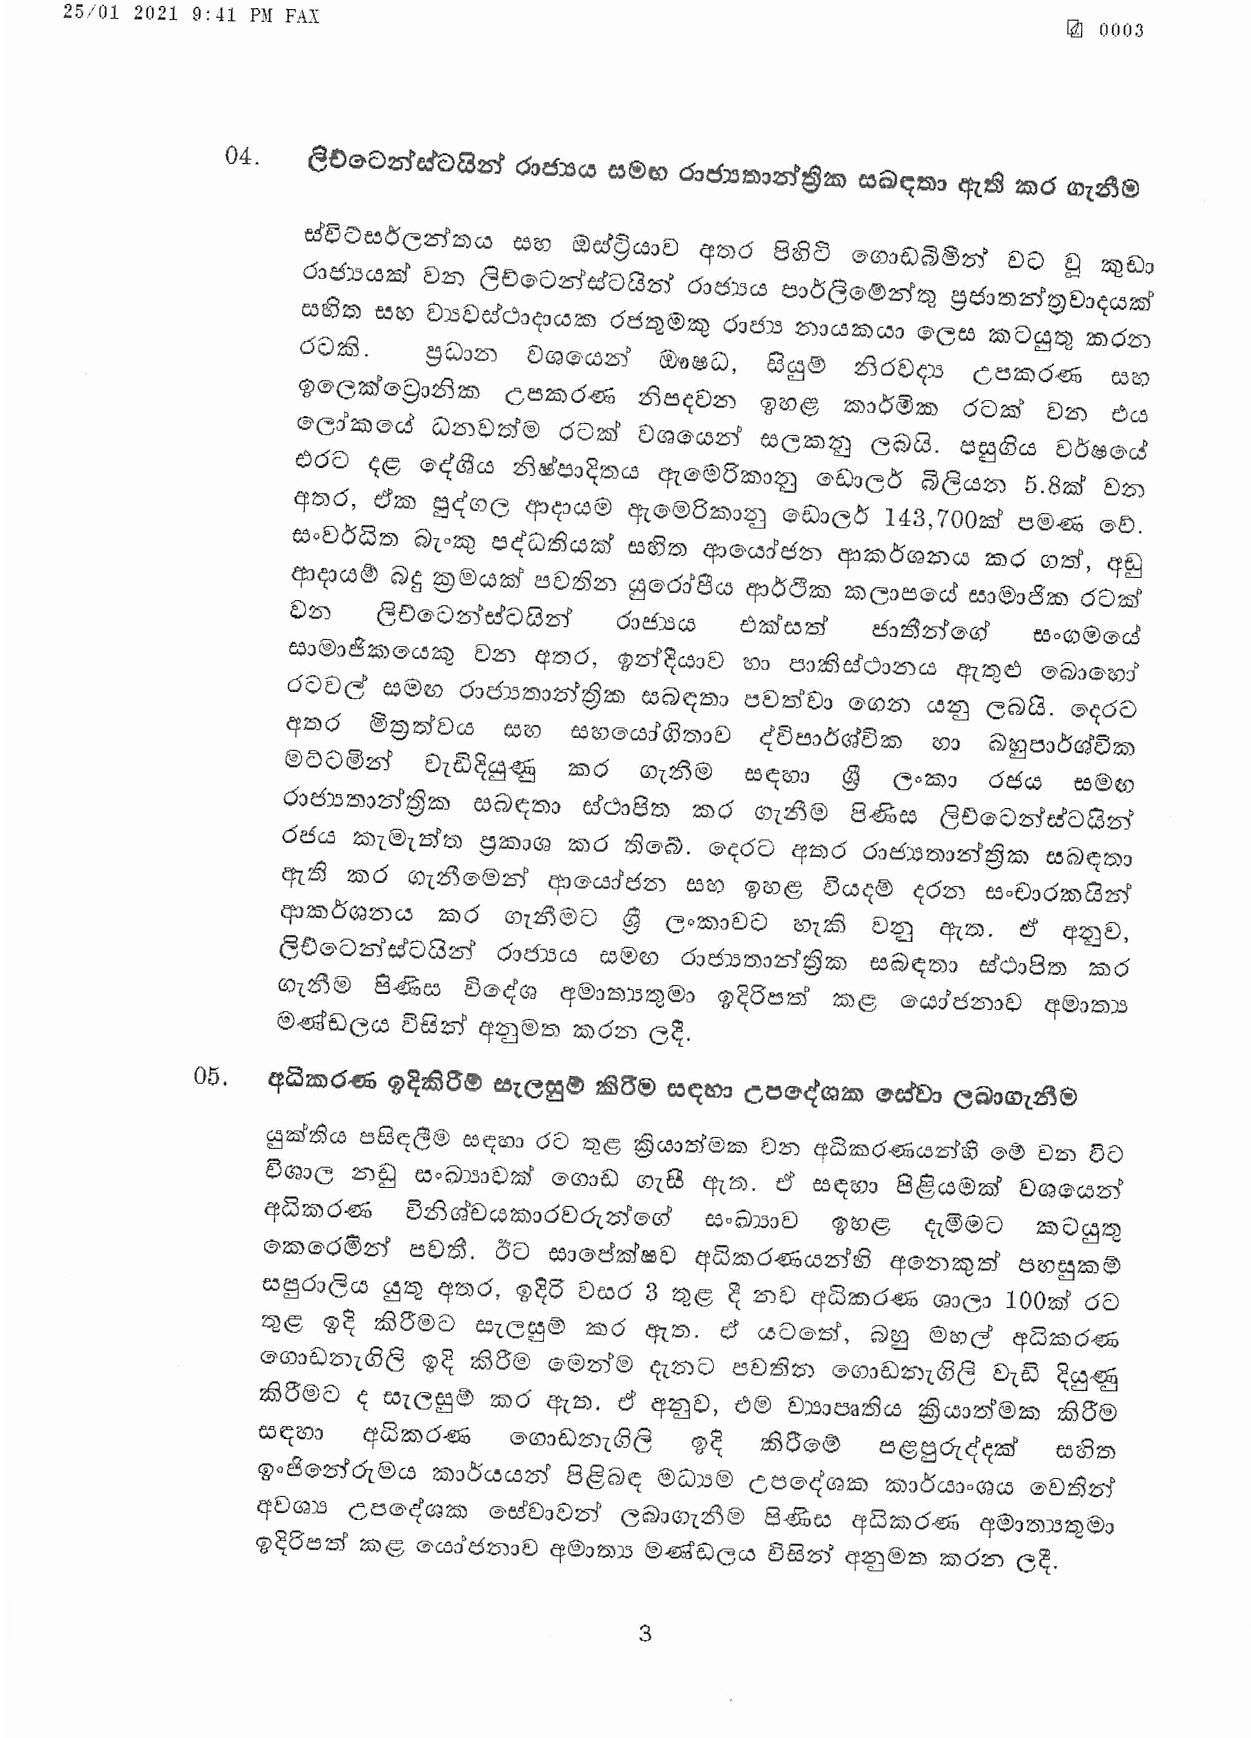 Cabinet Decision on 25.01.2021 page 003